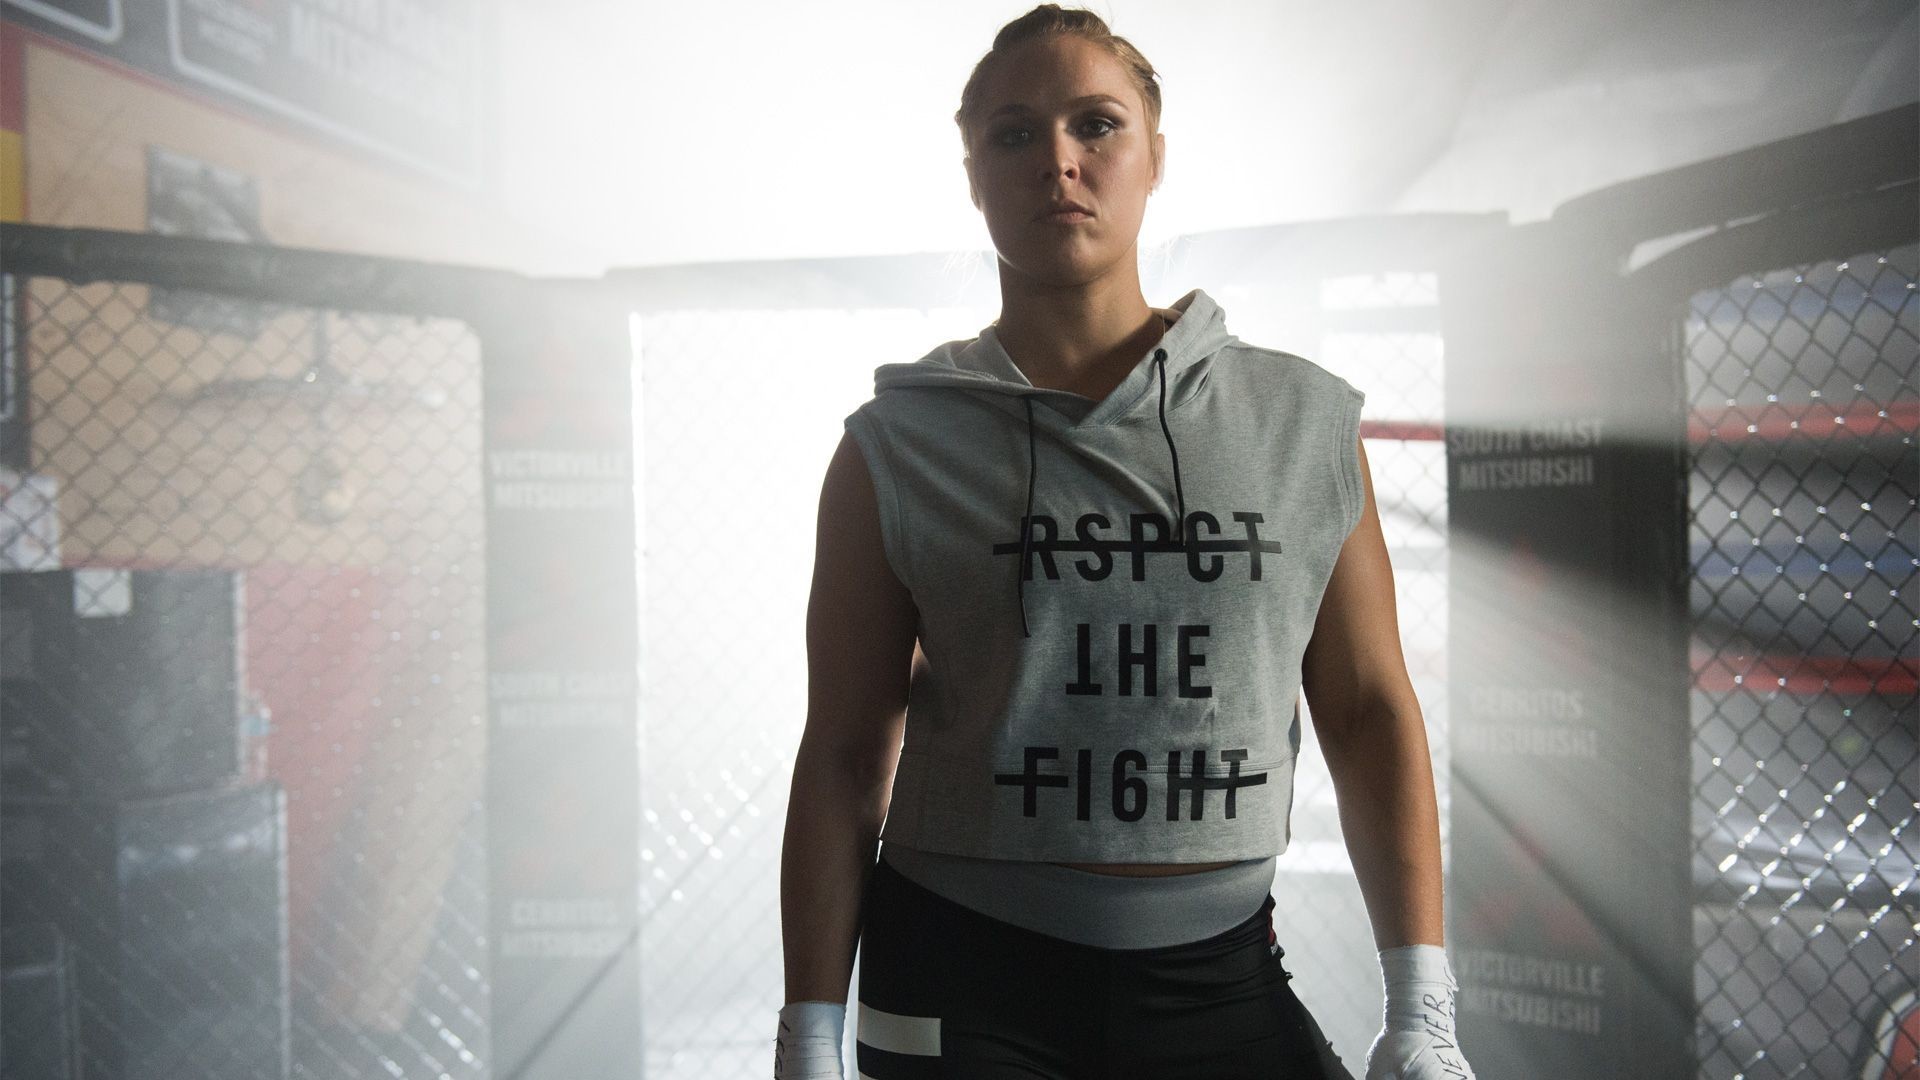 1920x1080 Ronda Rousey Wallpaper http://wallpapers-and-backgrounds.net/ronda